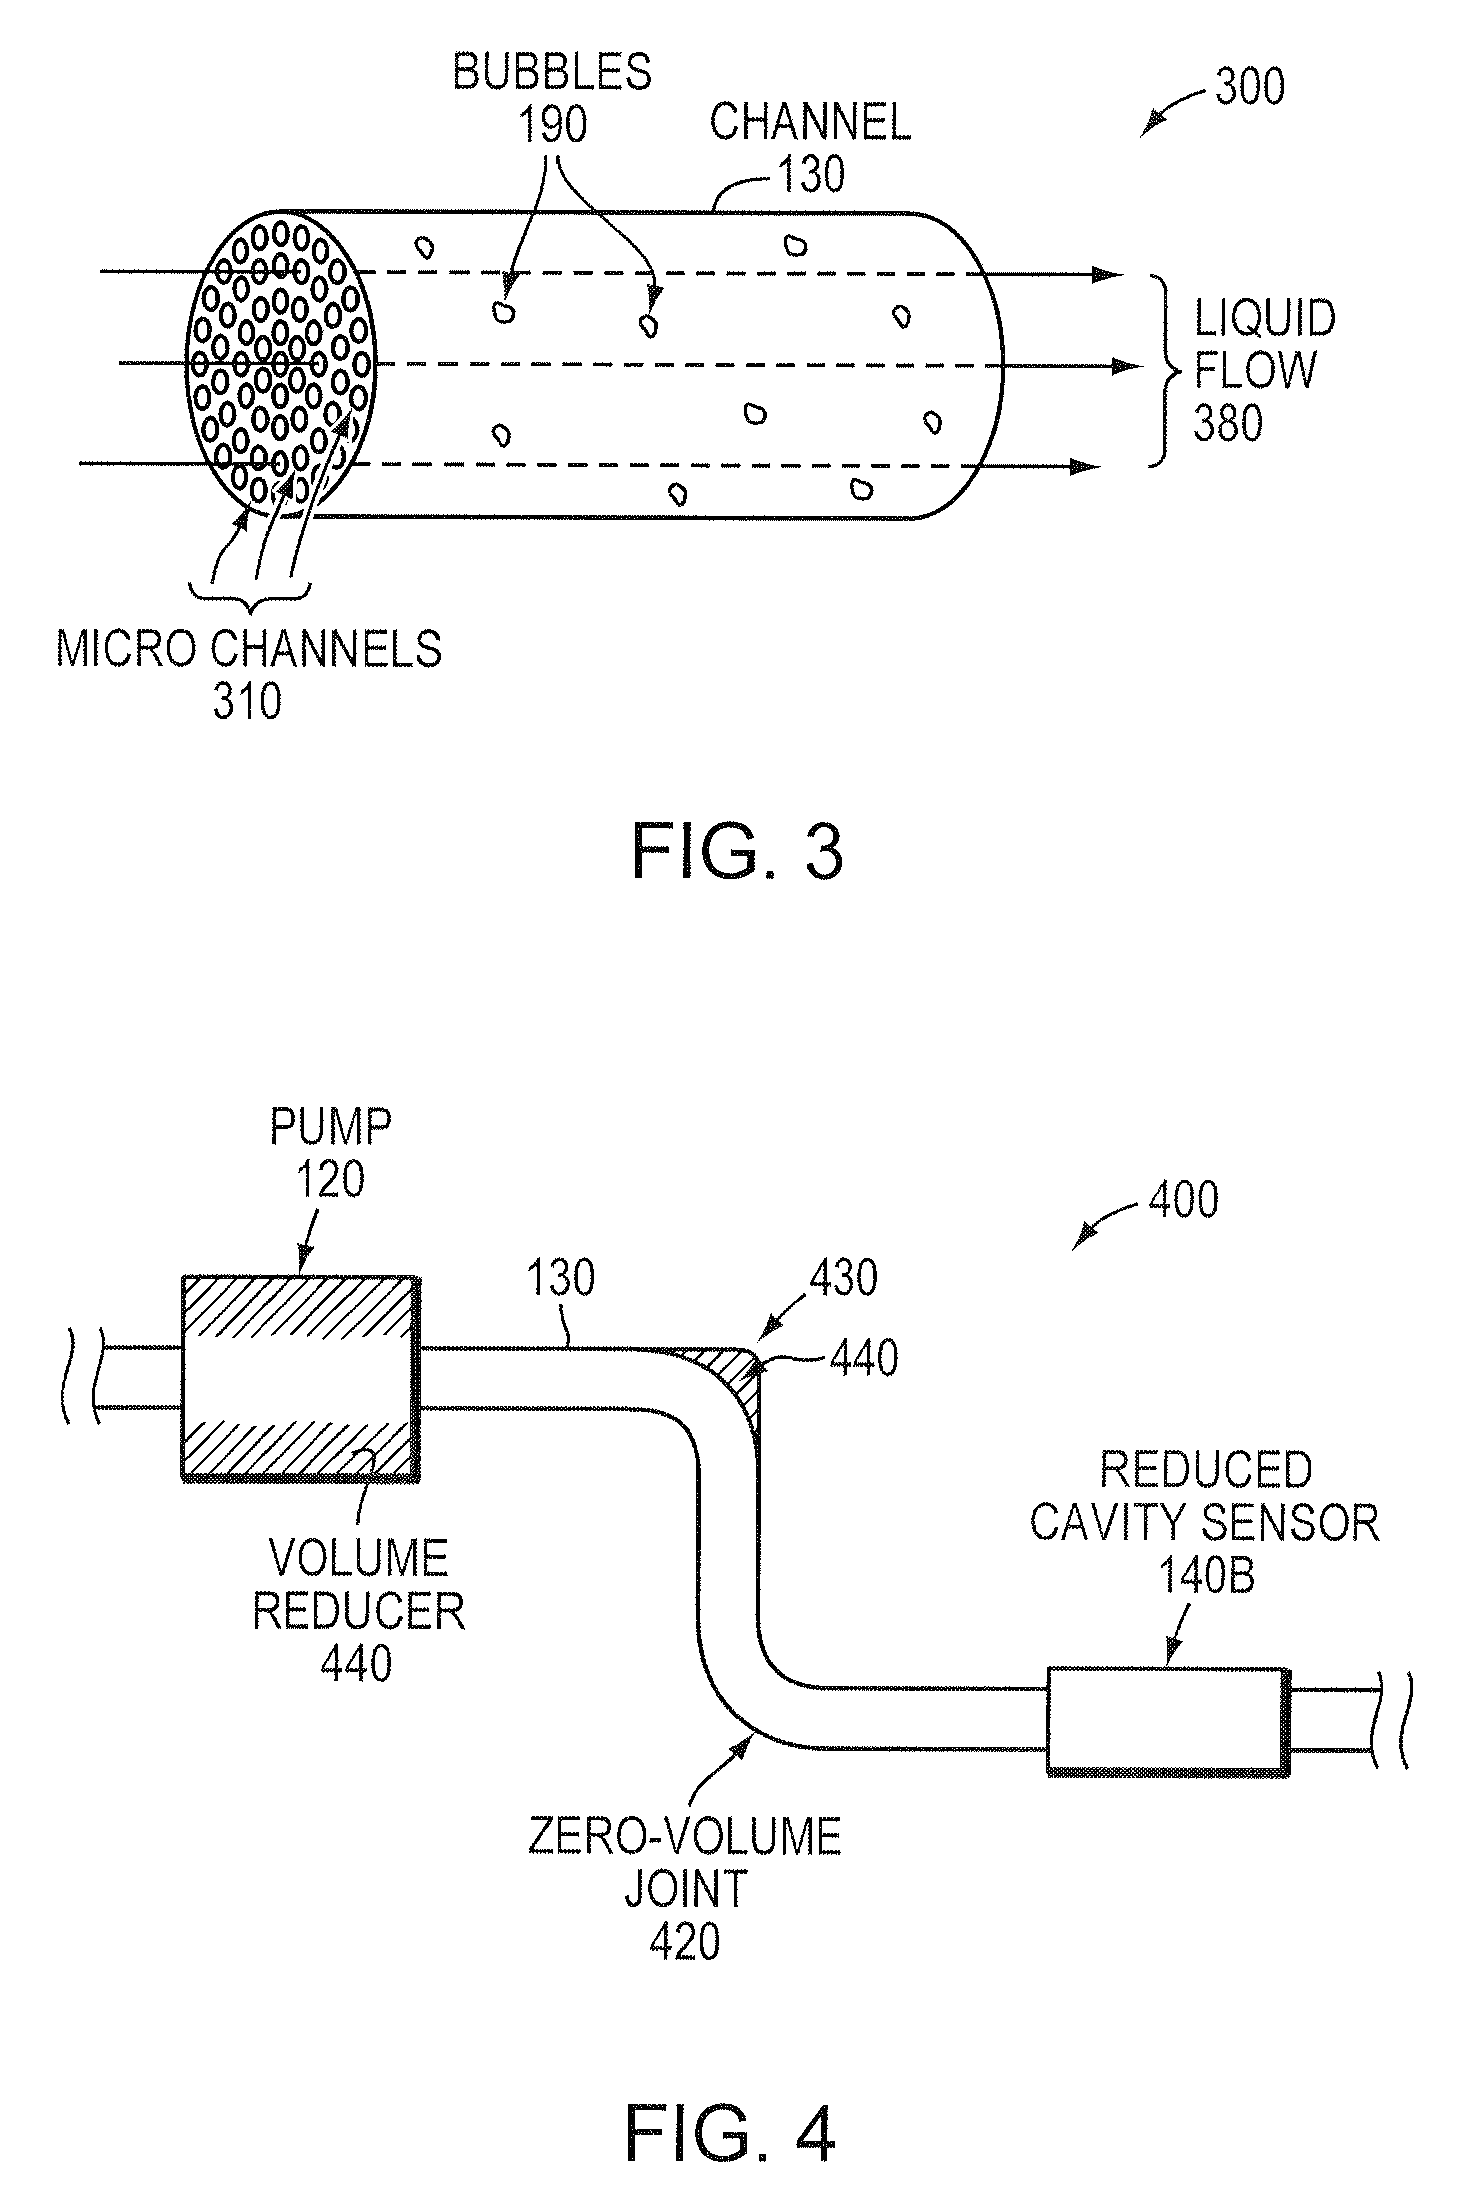 Managing gas bubbles in a liquid flow system